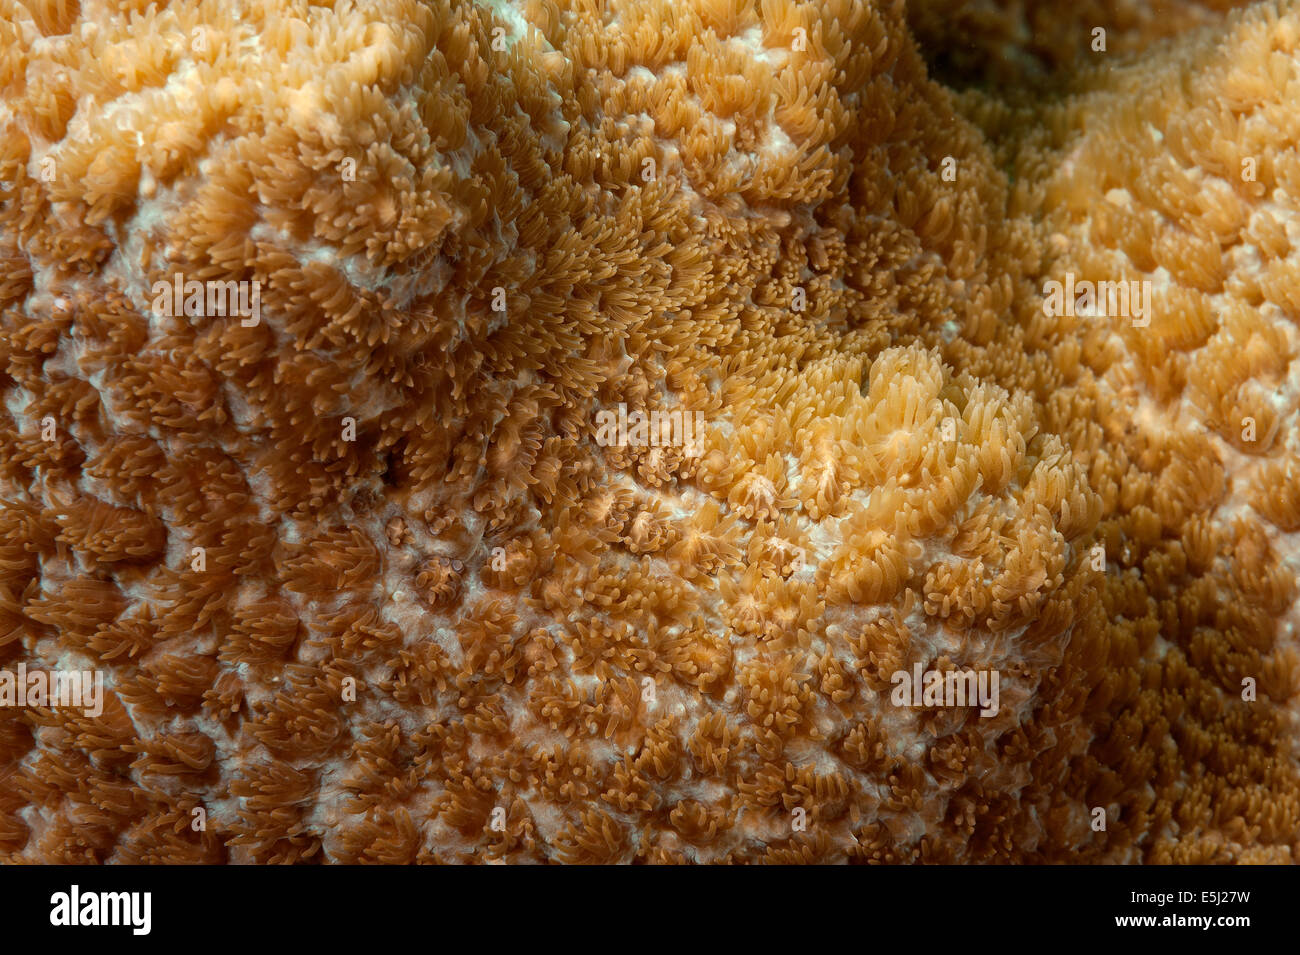 Detail of Alveopora sp. coral in the Red Sea off Sudan coast Stock Photo